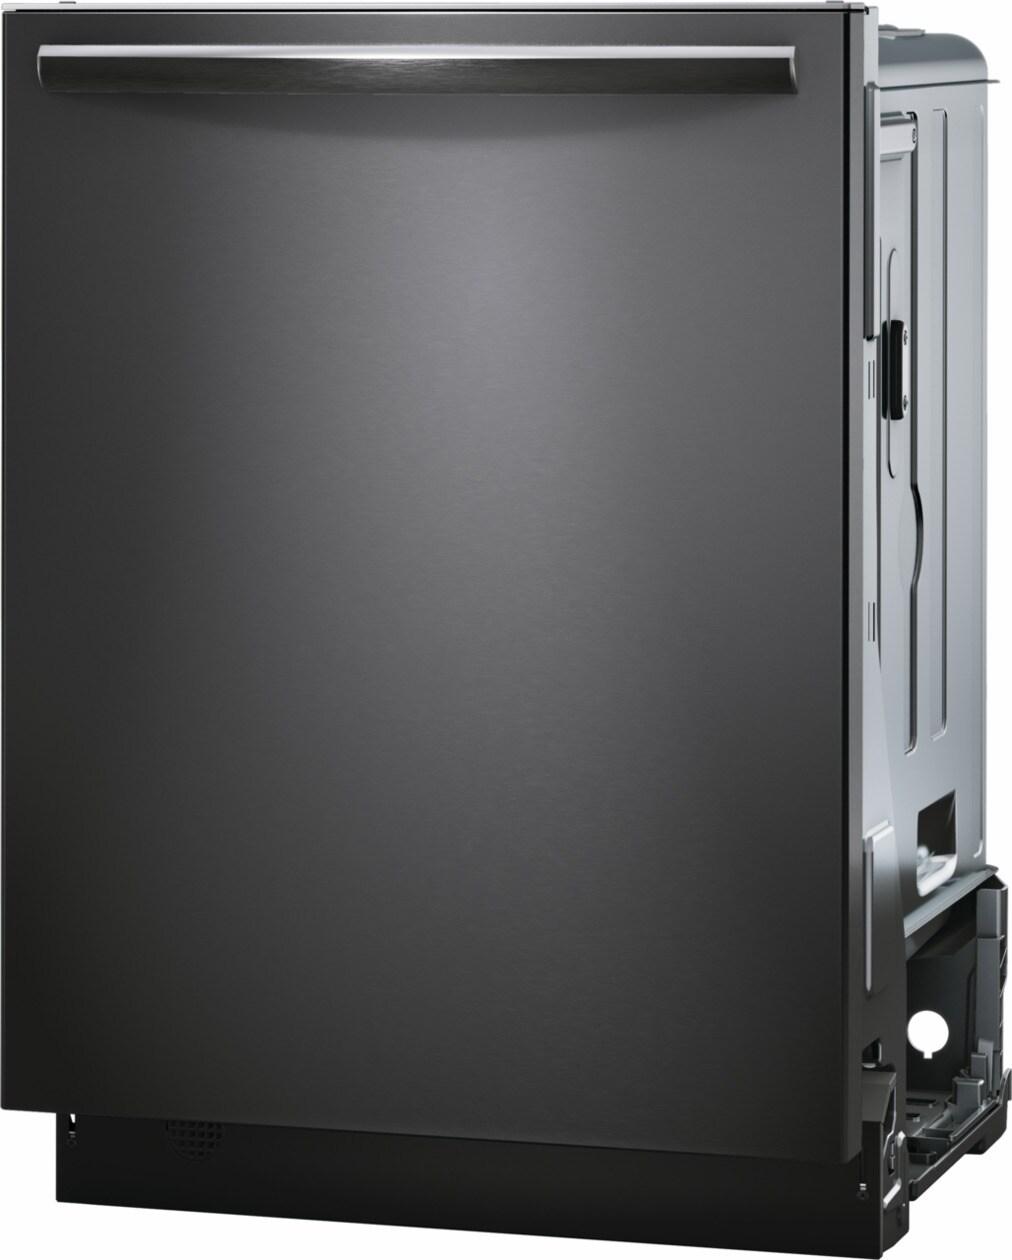 Frigidaire GDSH4715AD Frigidaire Gallery 24" Stainless Steel Tub Built-In Dishwasher With Cleanboost&#8482;